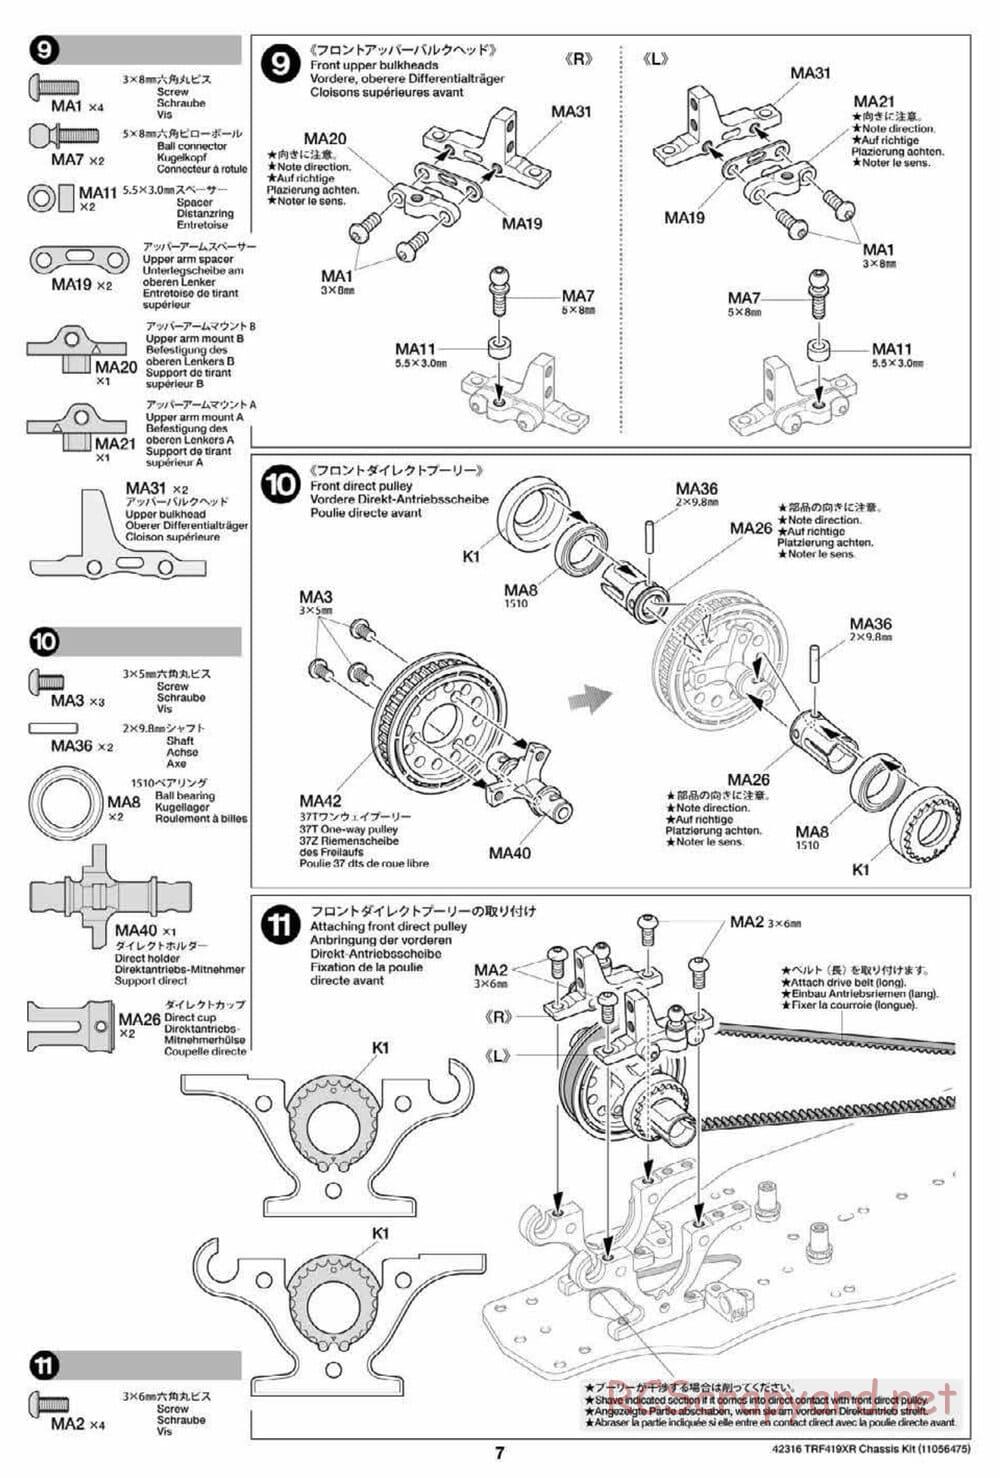 Tamiya - TRF419XR Chassis - Manual - Page 7